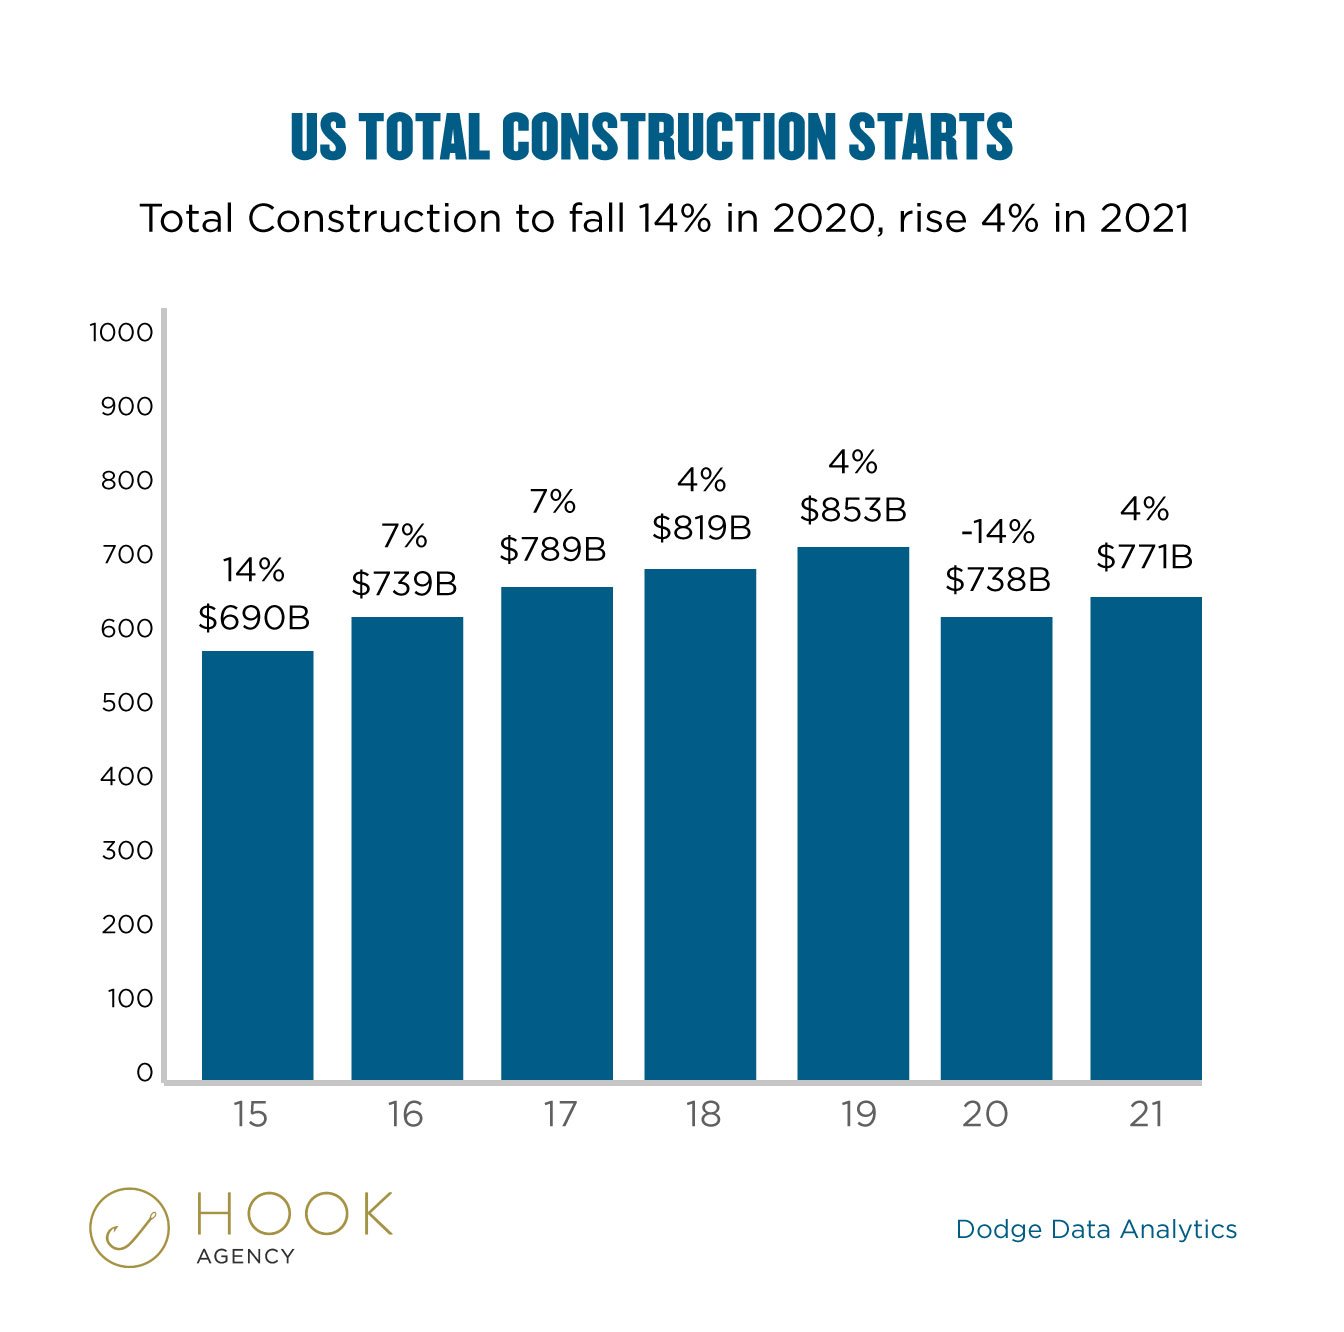 U.S. Total Construction Starts Data Outlook Industry 